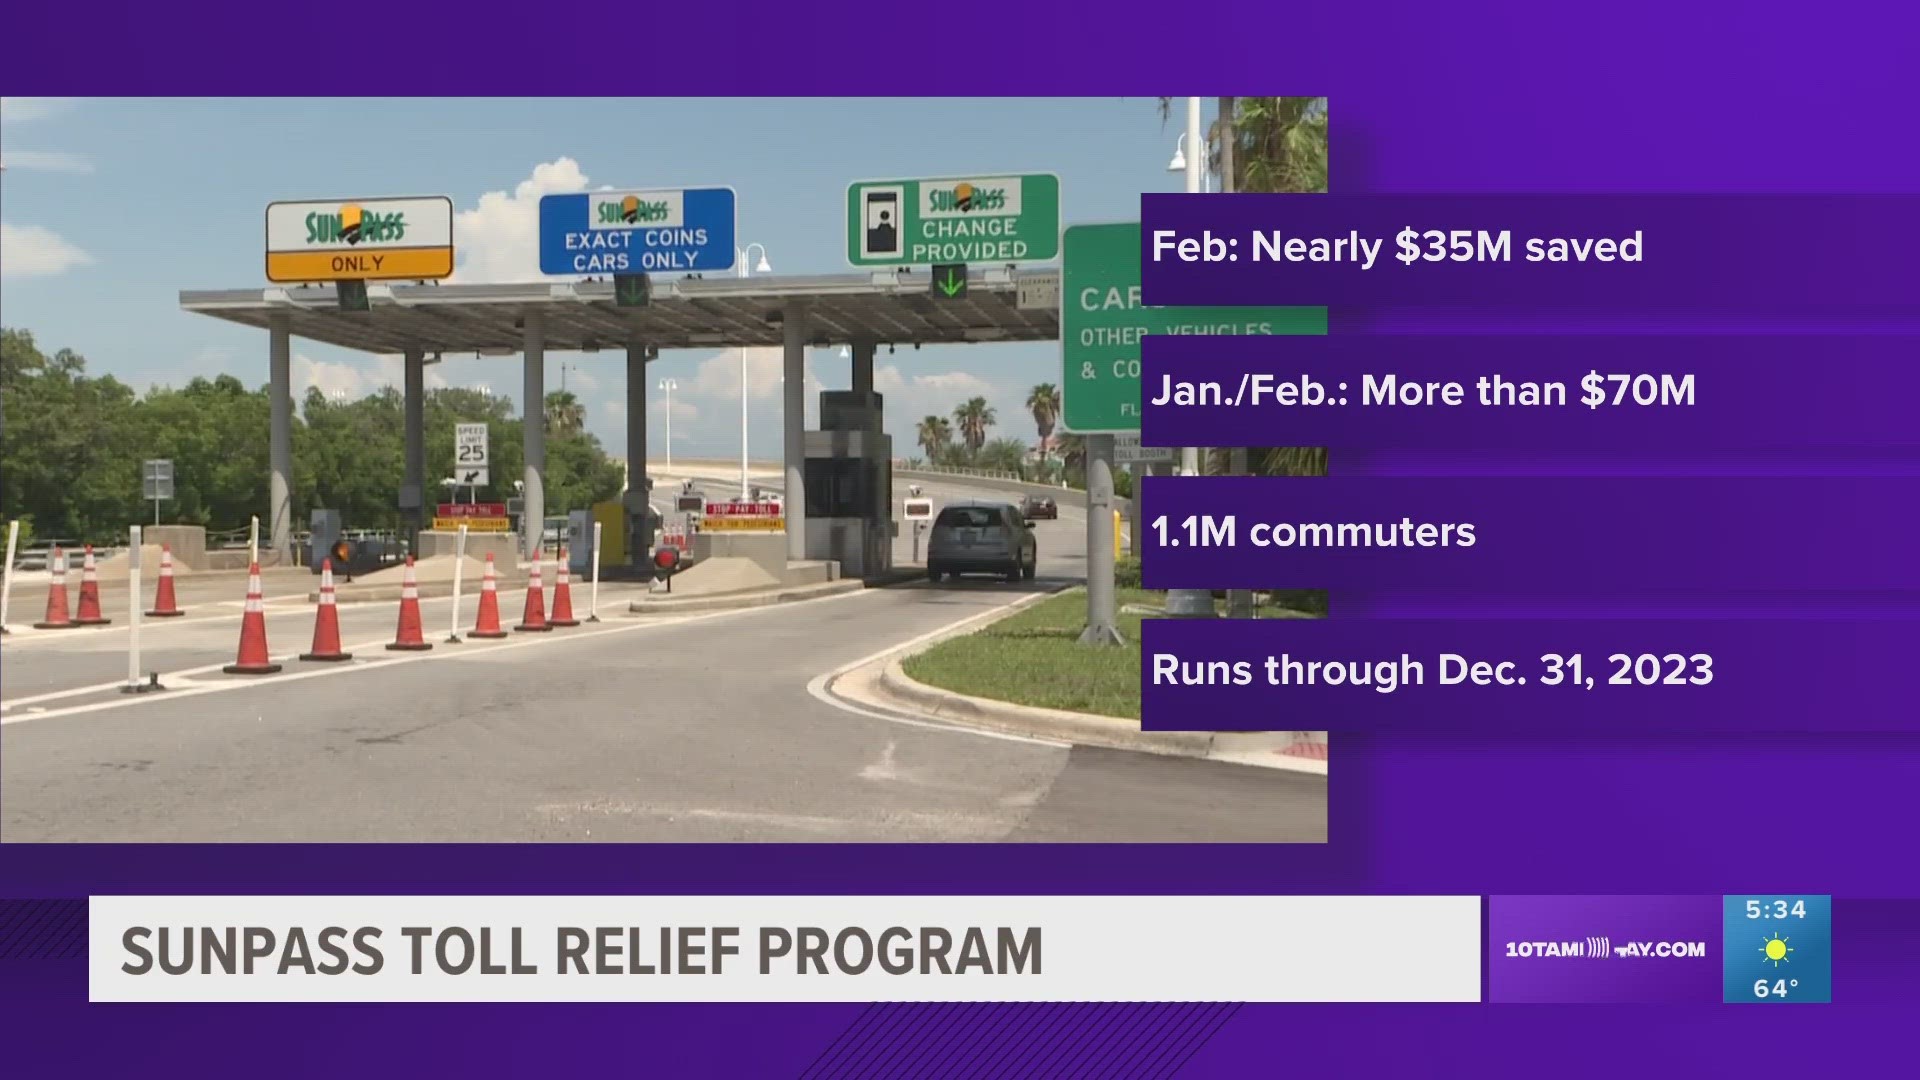 Nearly 1.1 million commuters and their families were impacted by these savings, FDOT explains.